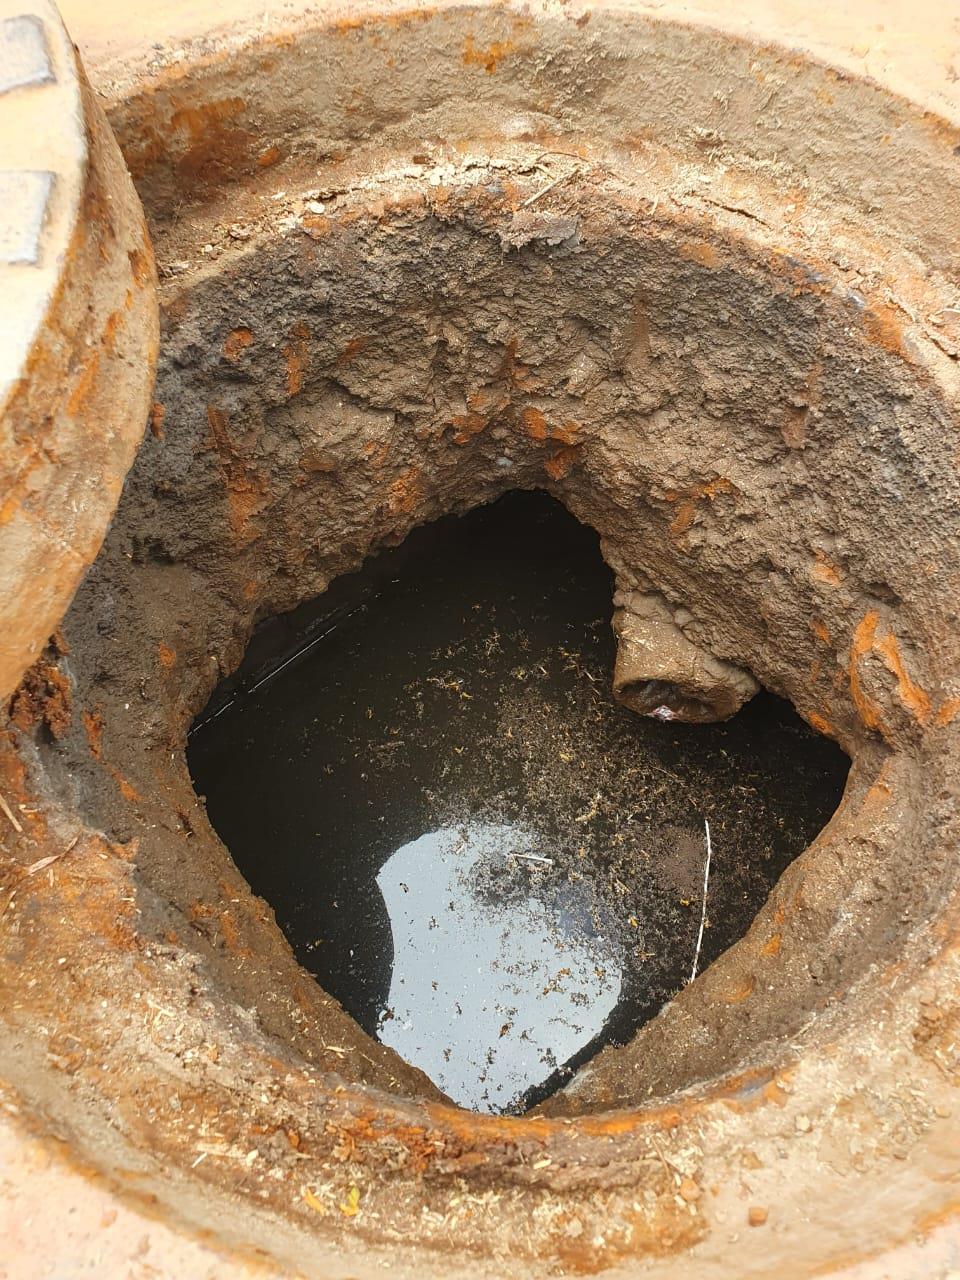 Ludhiana: Rs 10L fine imposed on steel unit for discharging effluent into sewer